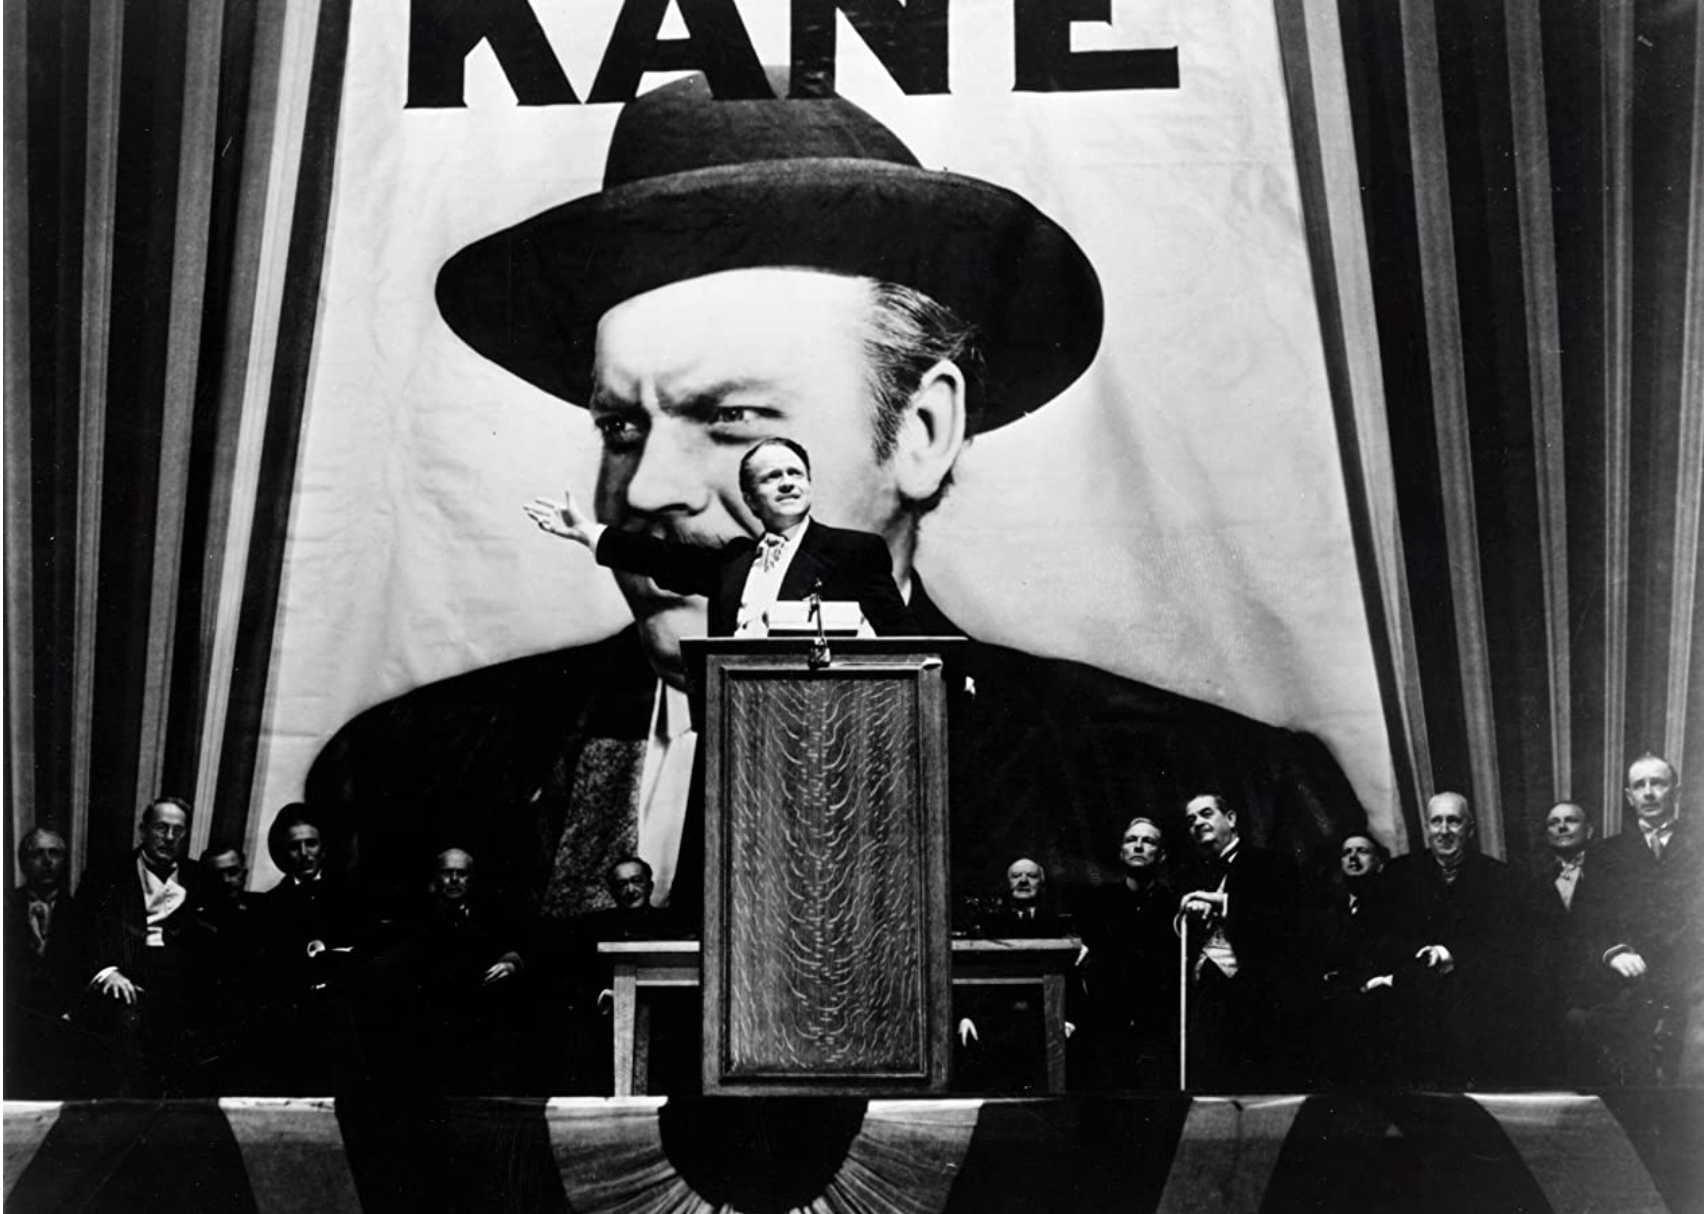 Orson Welles in a scene from Citizen Kane.